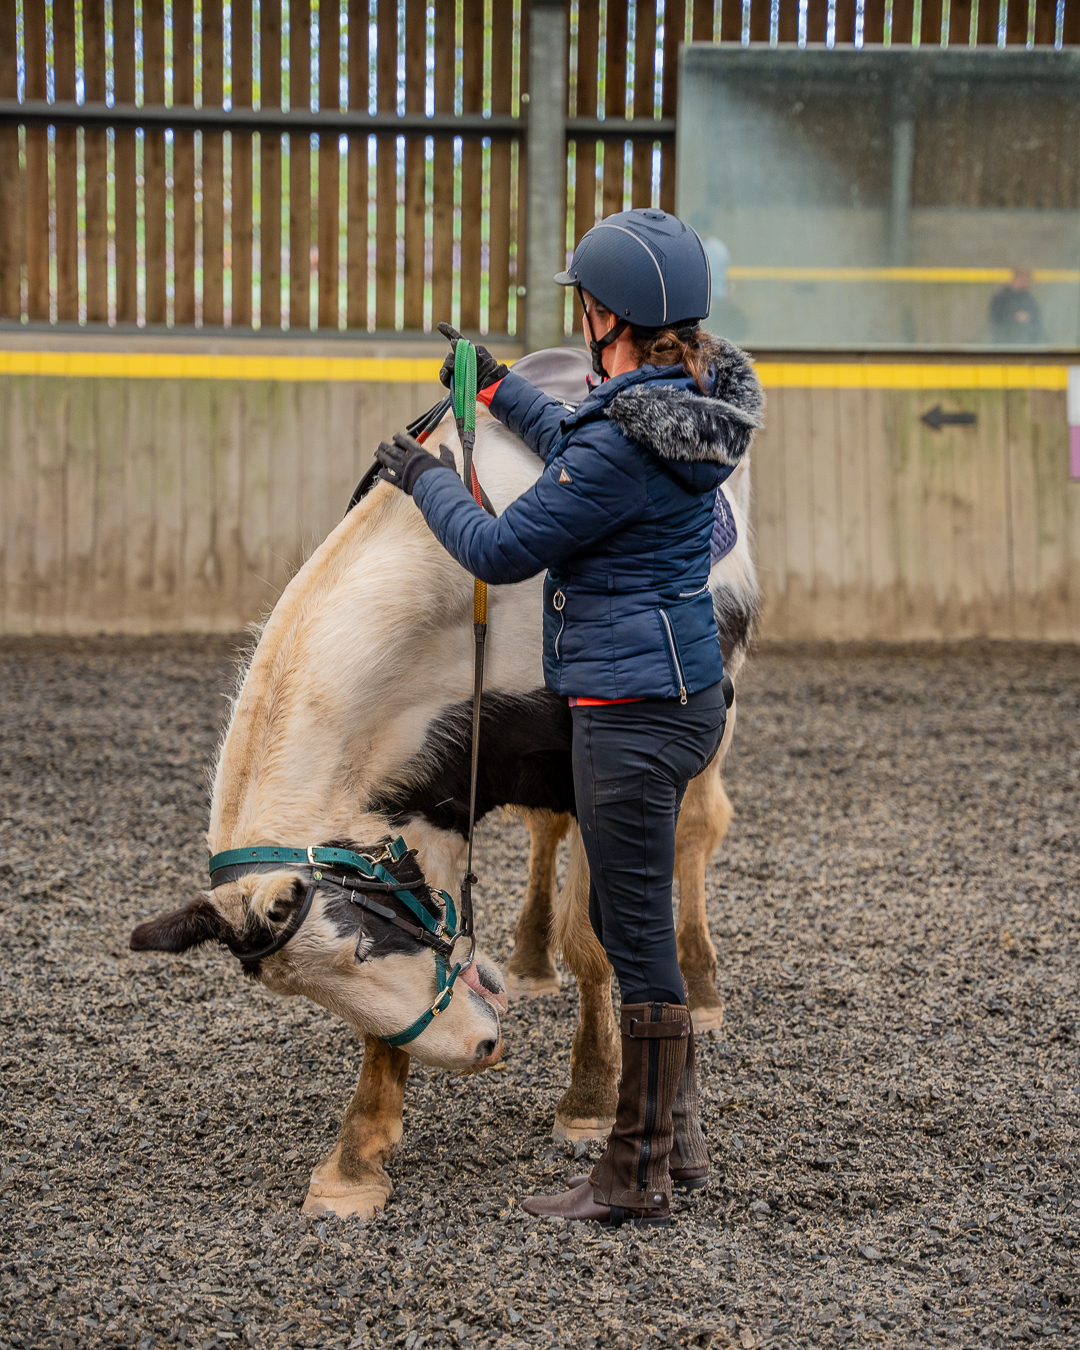 A guest is standing next to a white and black horse, whose head is down by its hoof, and she is holding the reigns within the indoor arena at Calvert Exmoor's Equestrian Centre.